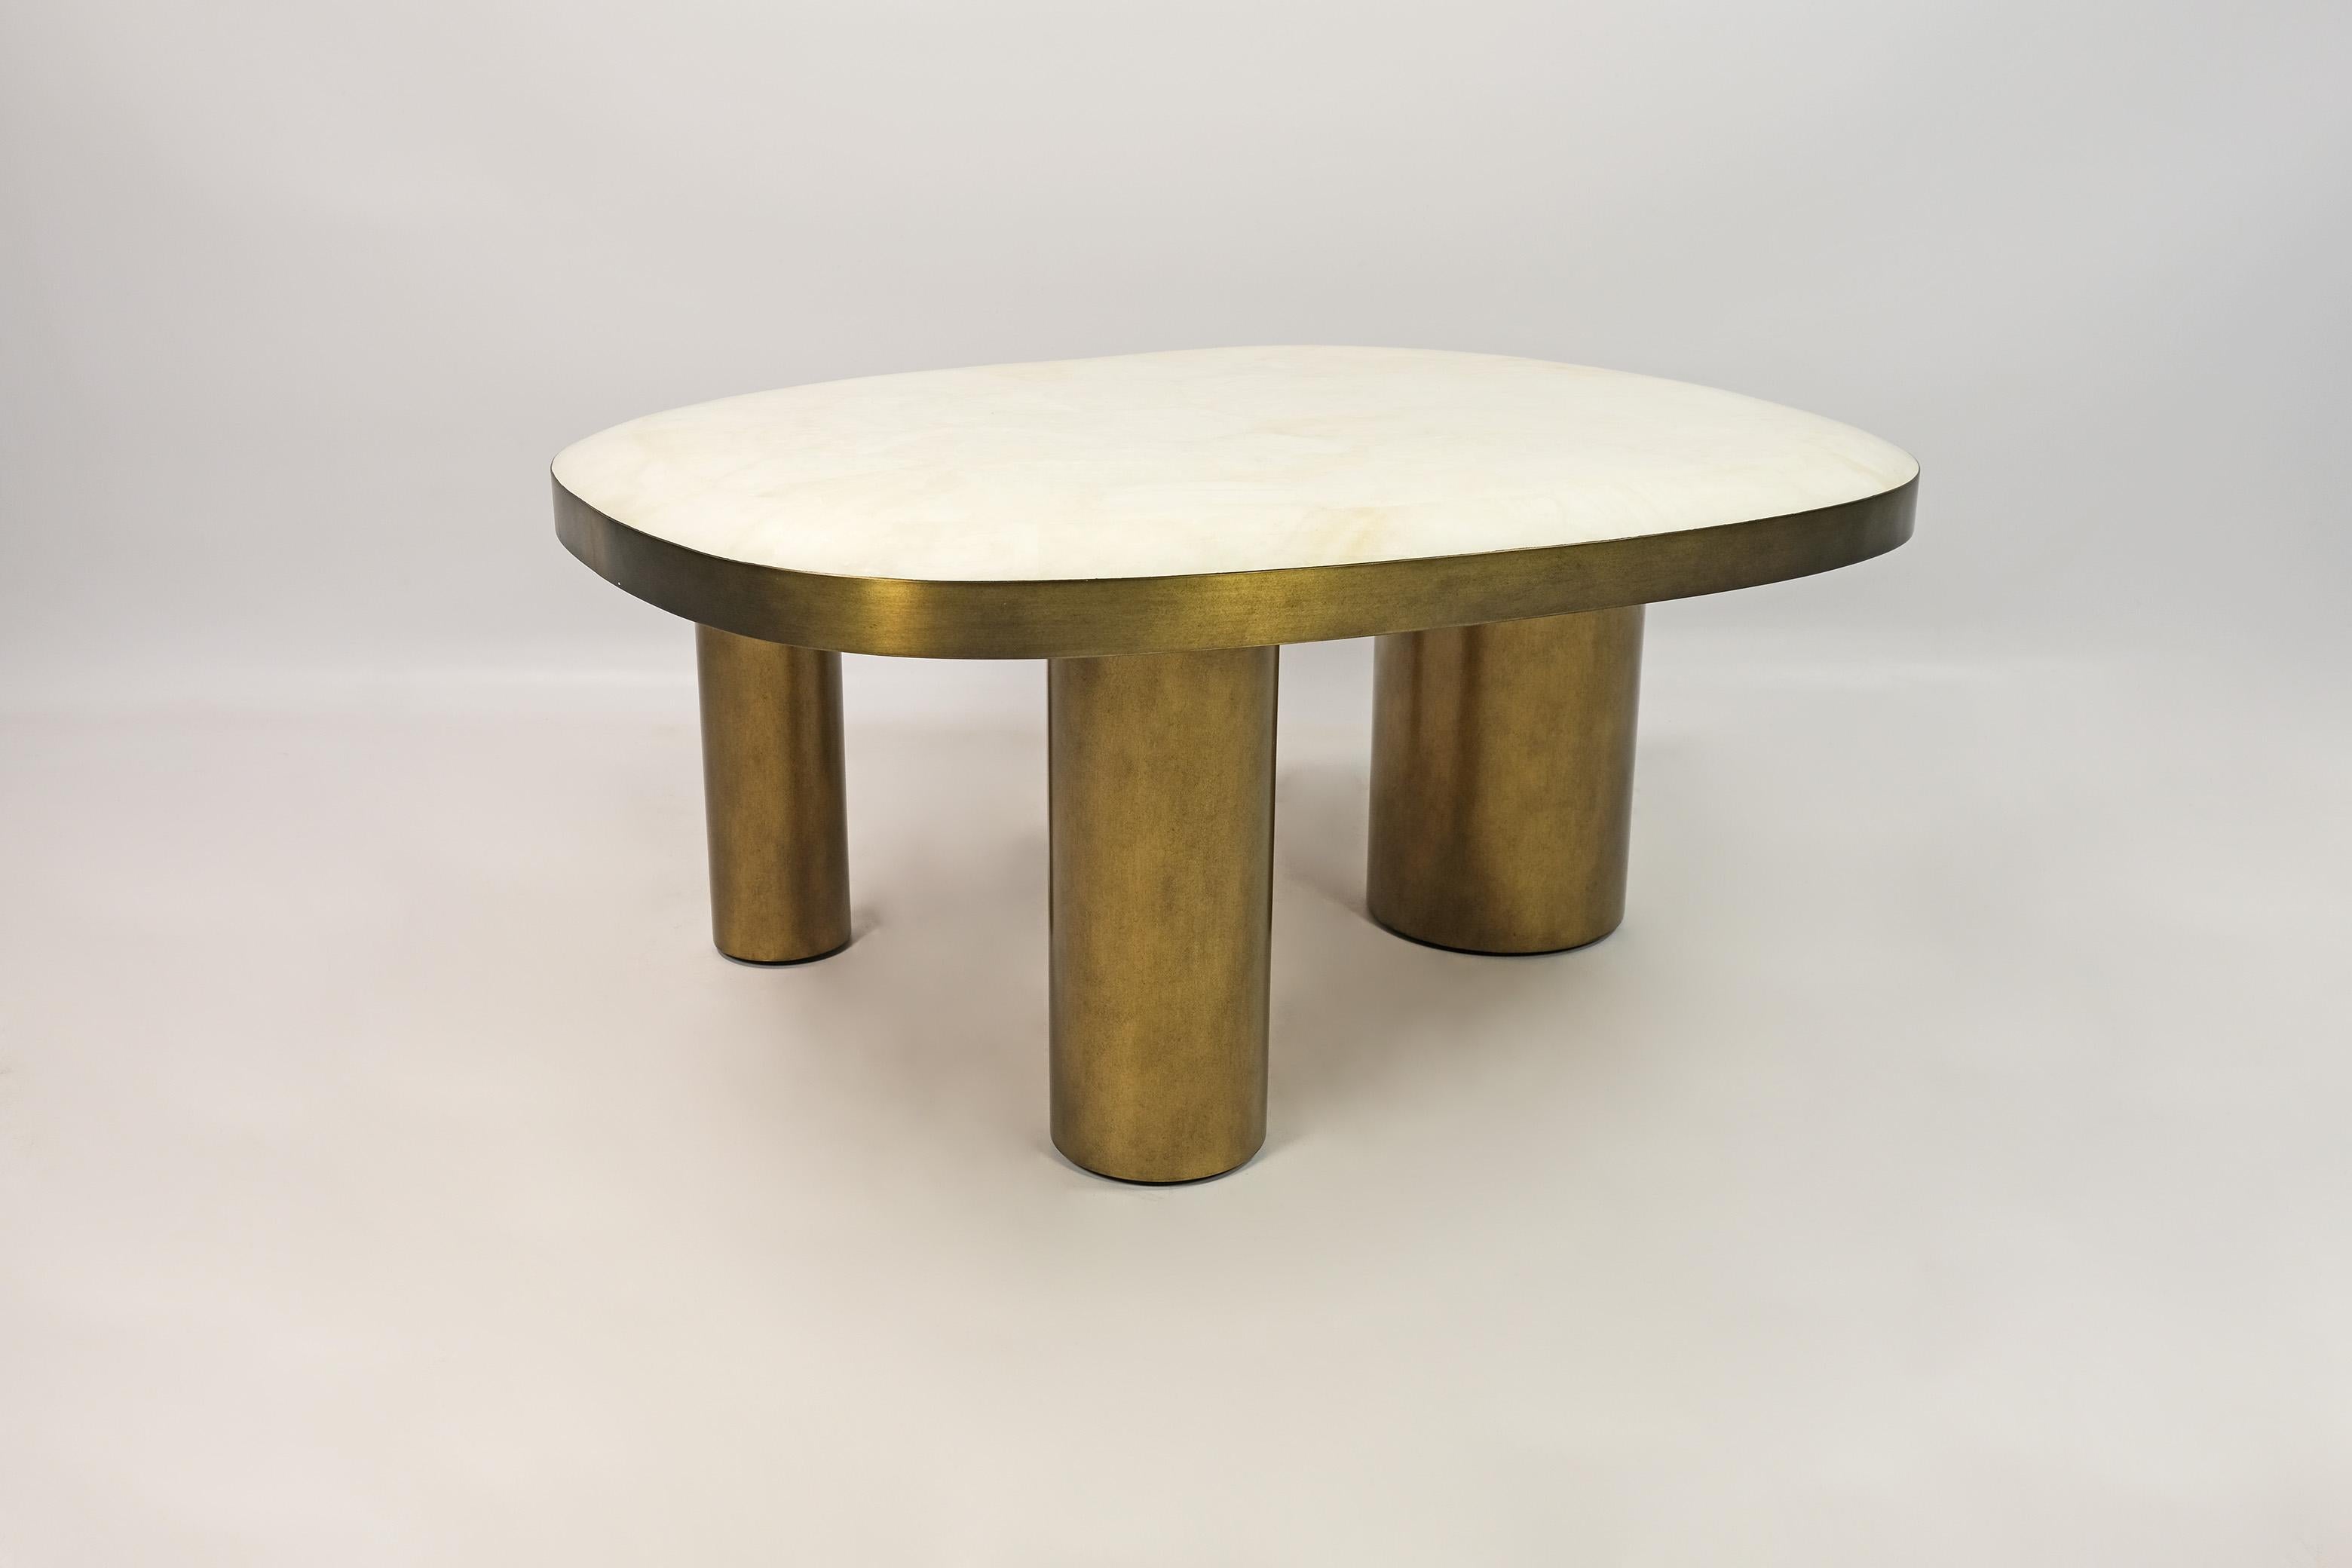 Hand-Crafted Set of 2 Organic Coffee Tables in Rock Crystal and Brass by Ginger Brown For Sale